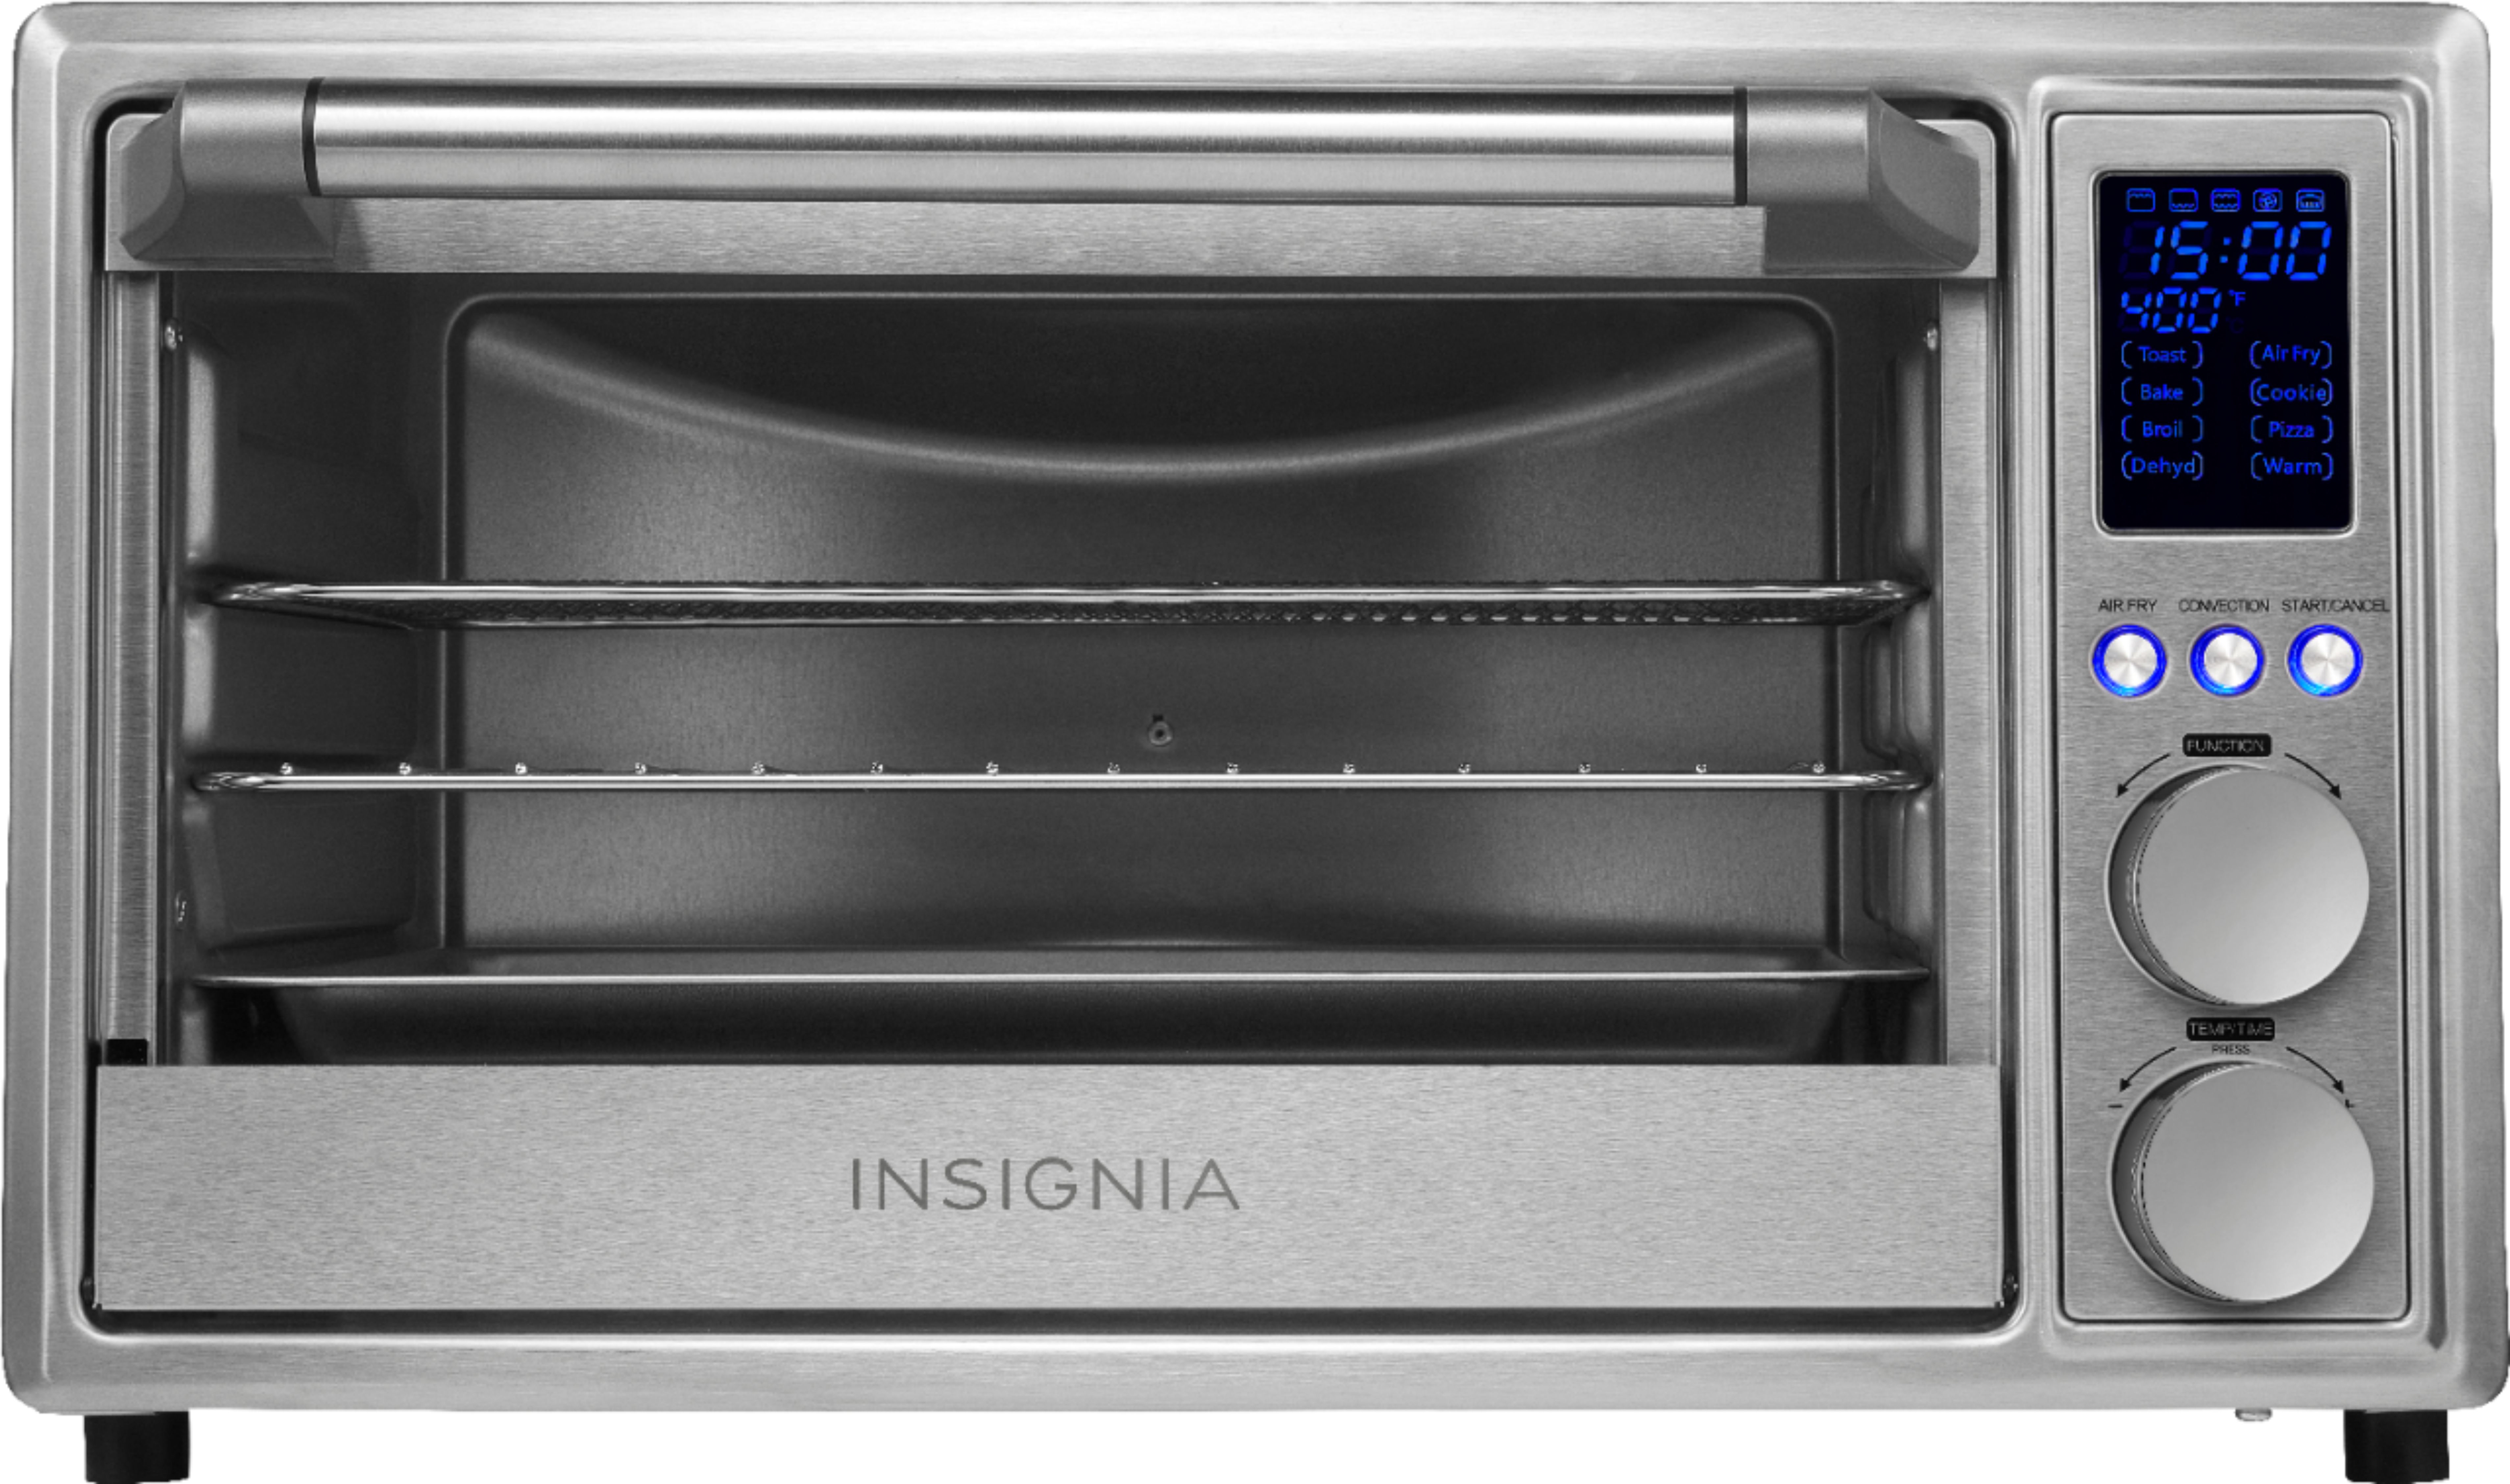 Insignia™ - 6-Slice Toaster Oven Air Fryer $59.99 $59.99